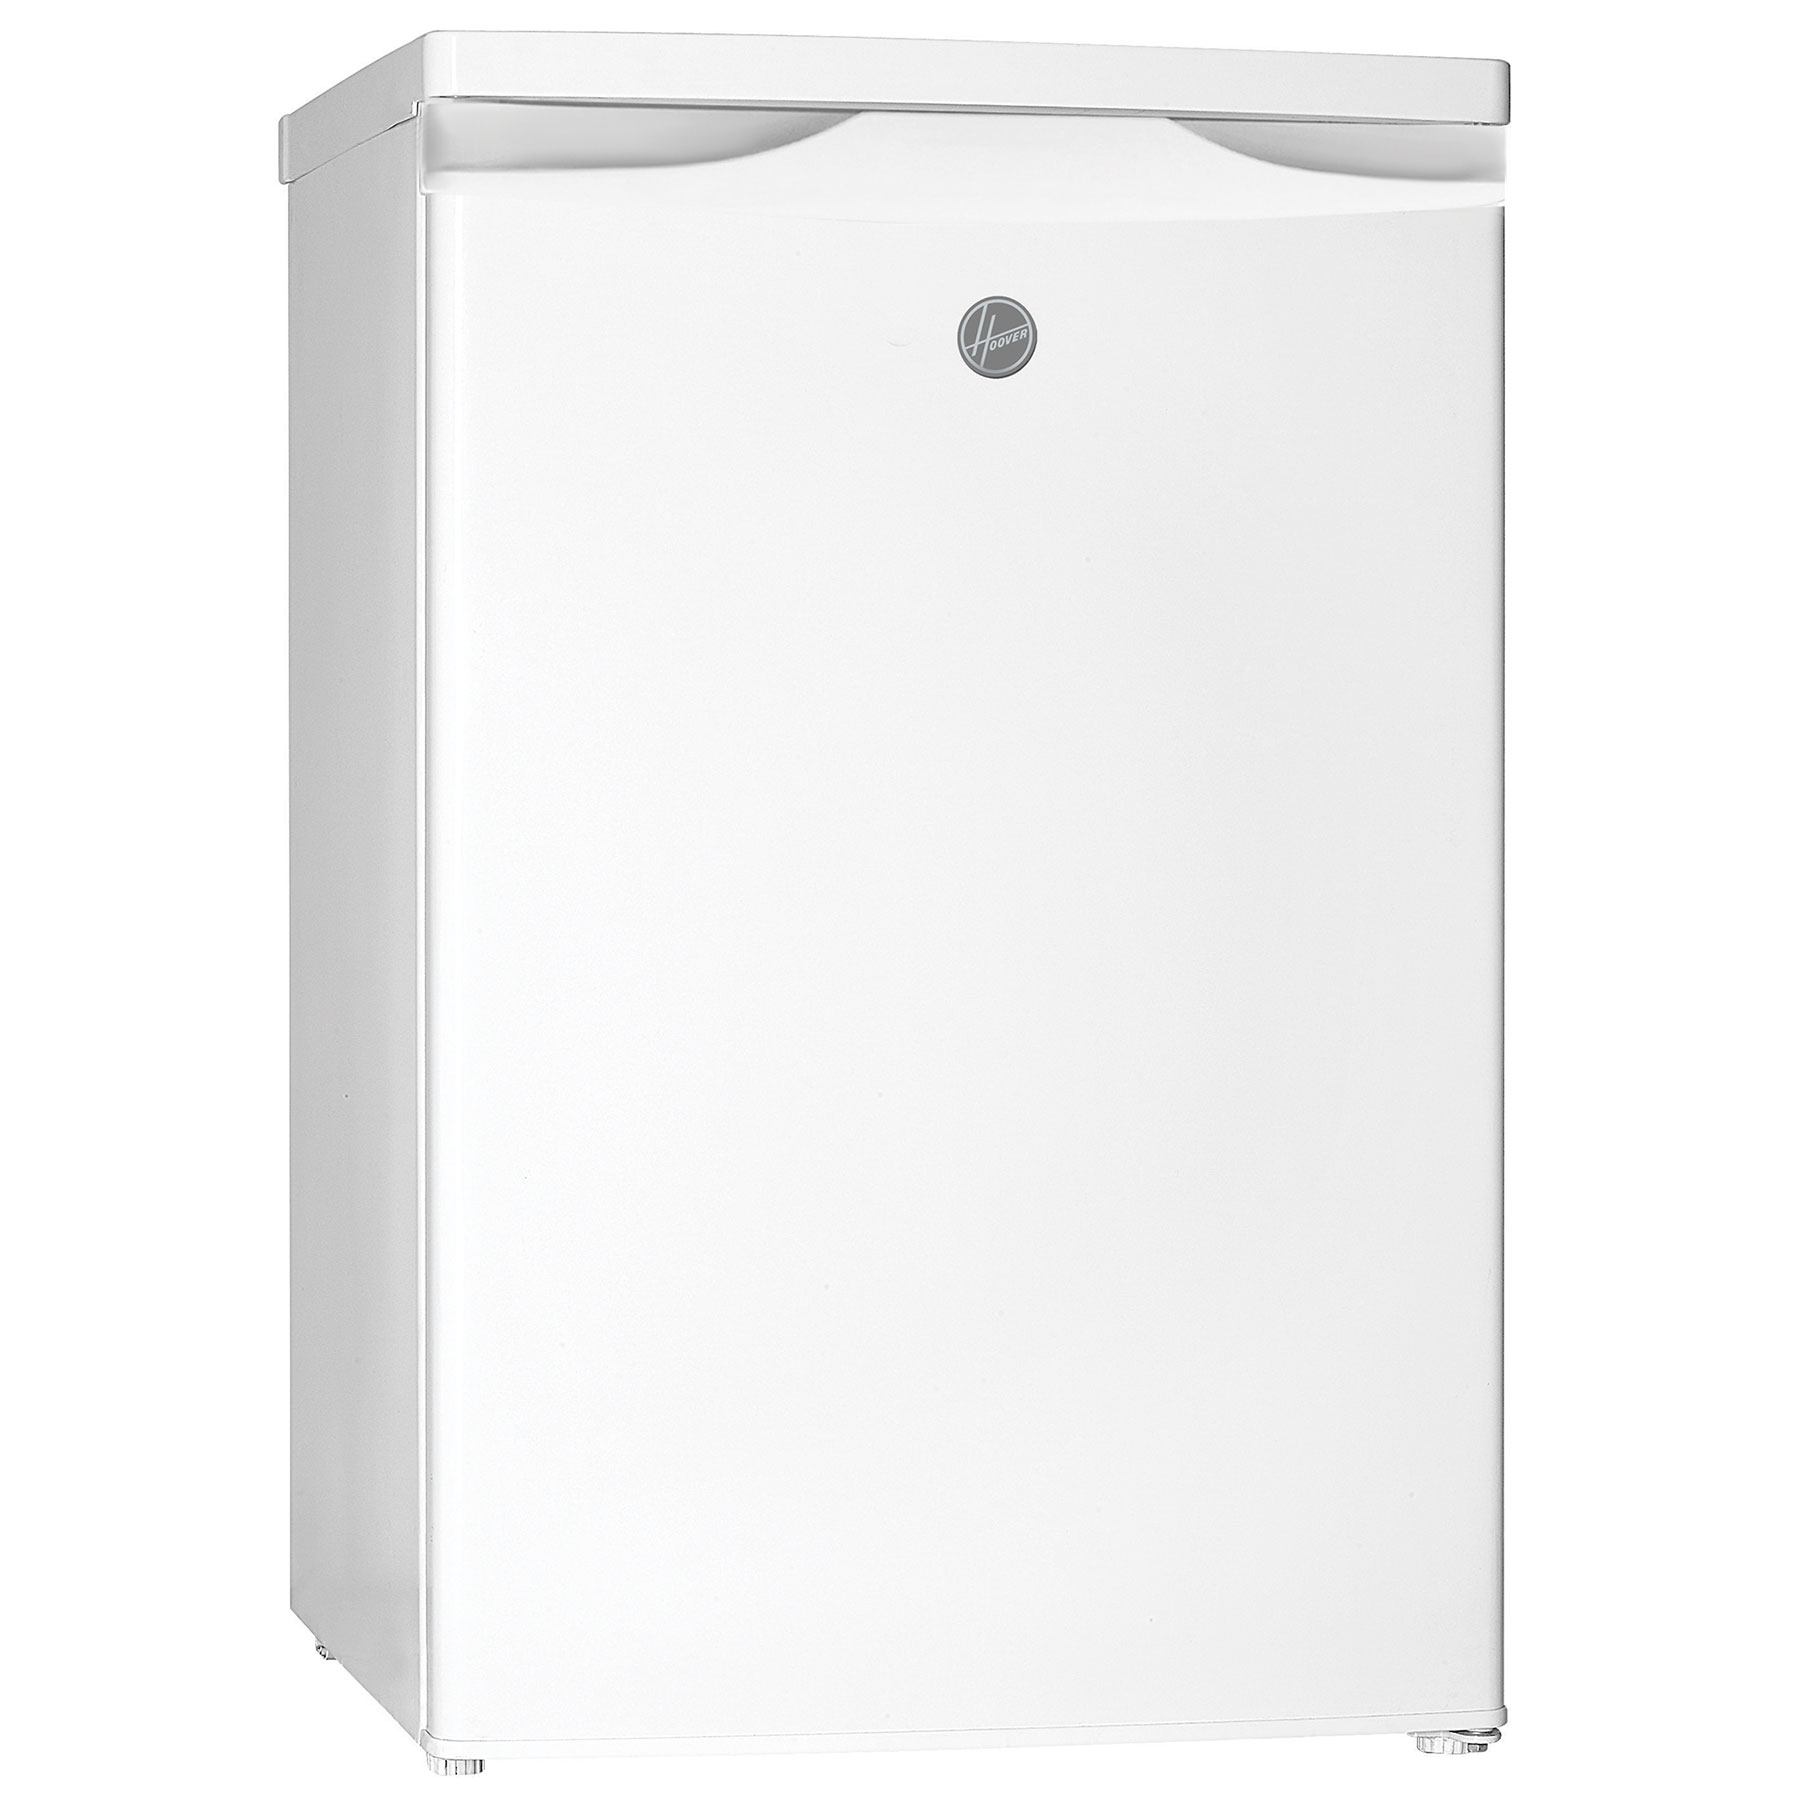 Image of Hoover HFOE54W 55cm Undercounter Fridge in White F Rated Icebox 95L